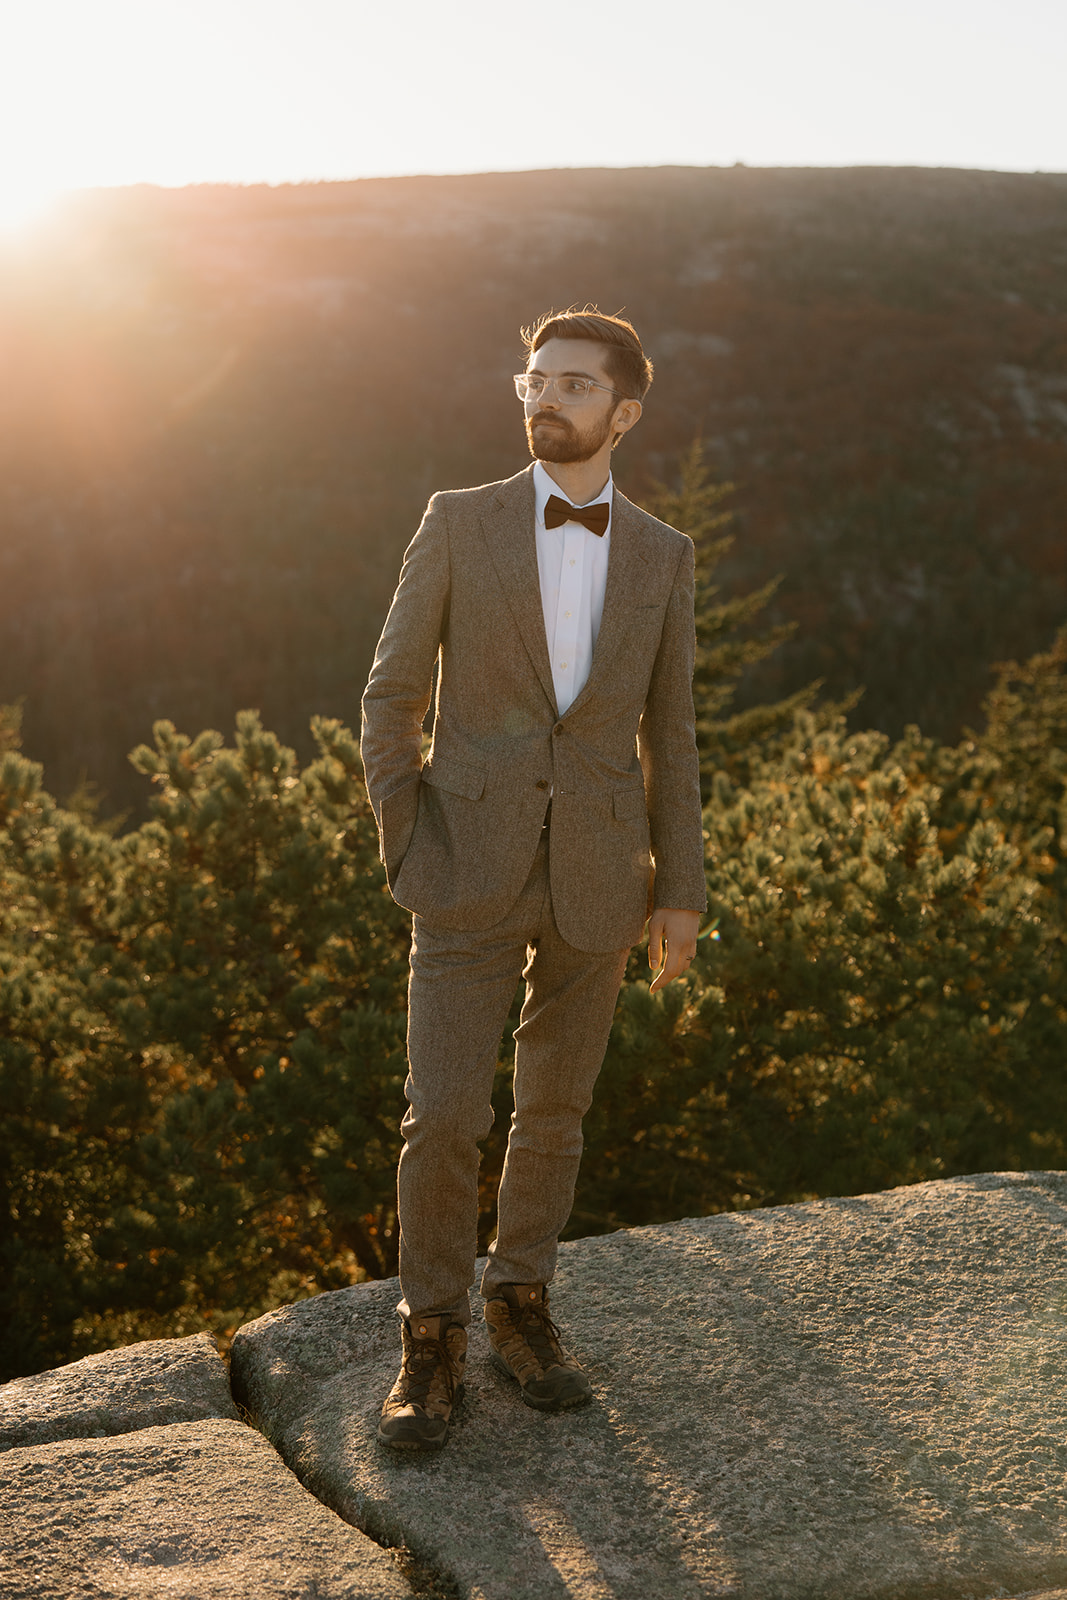 Bubble rock elopement and vows in the Fall. Acadia national park elopement and microwedding. Groom portrait.